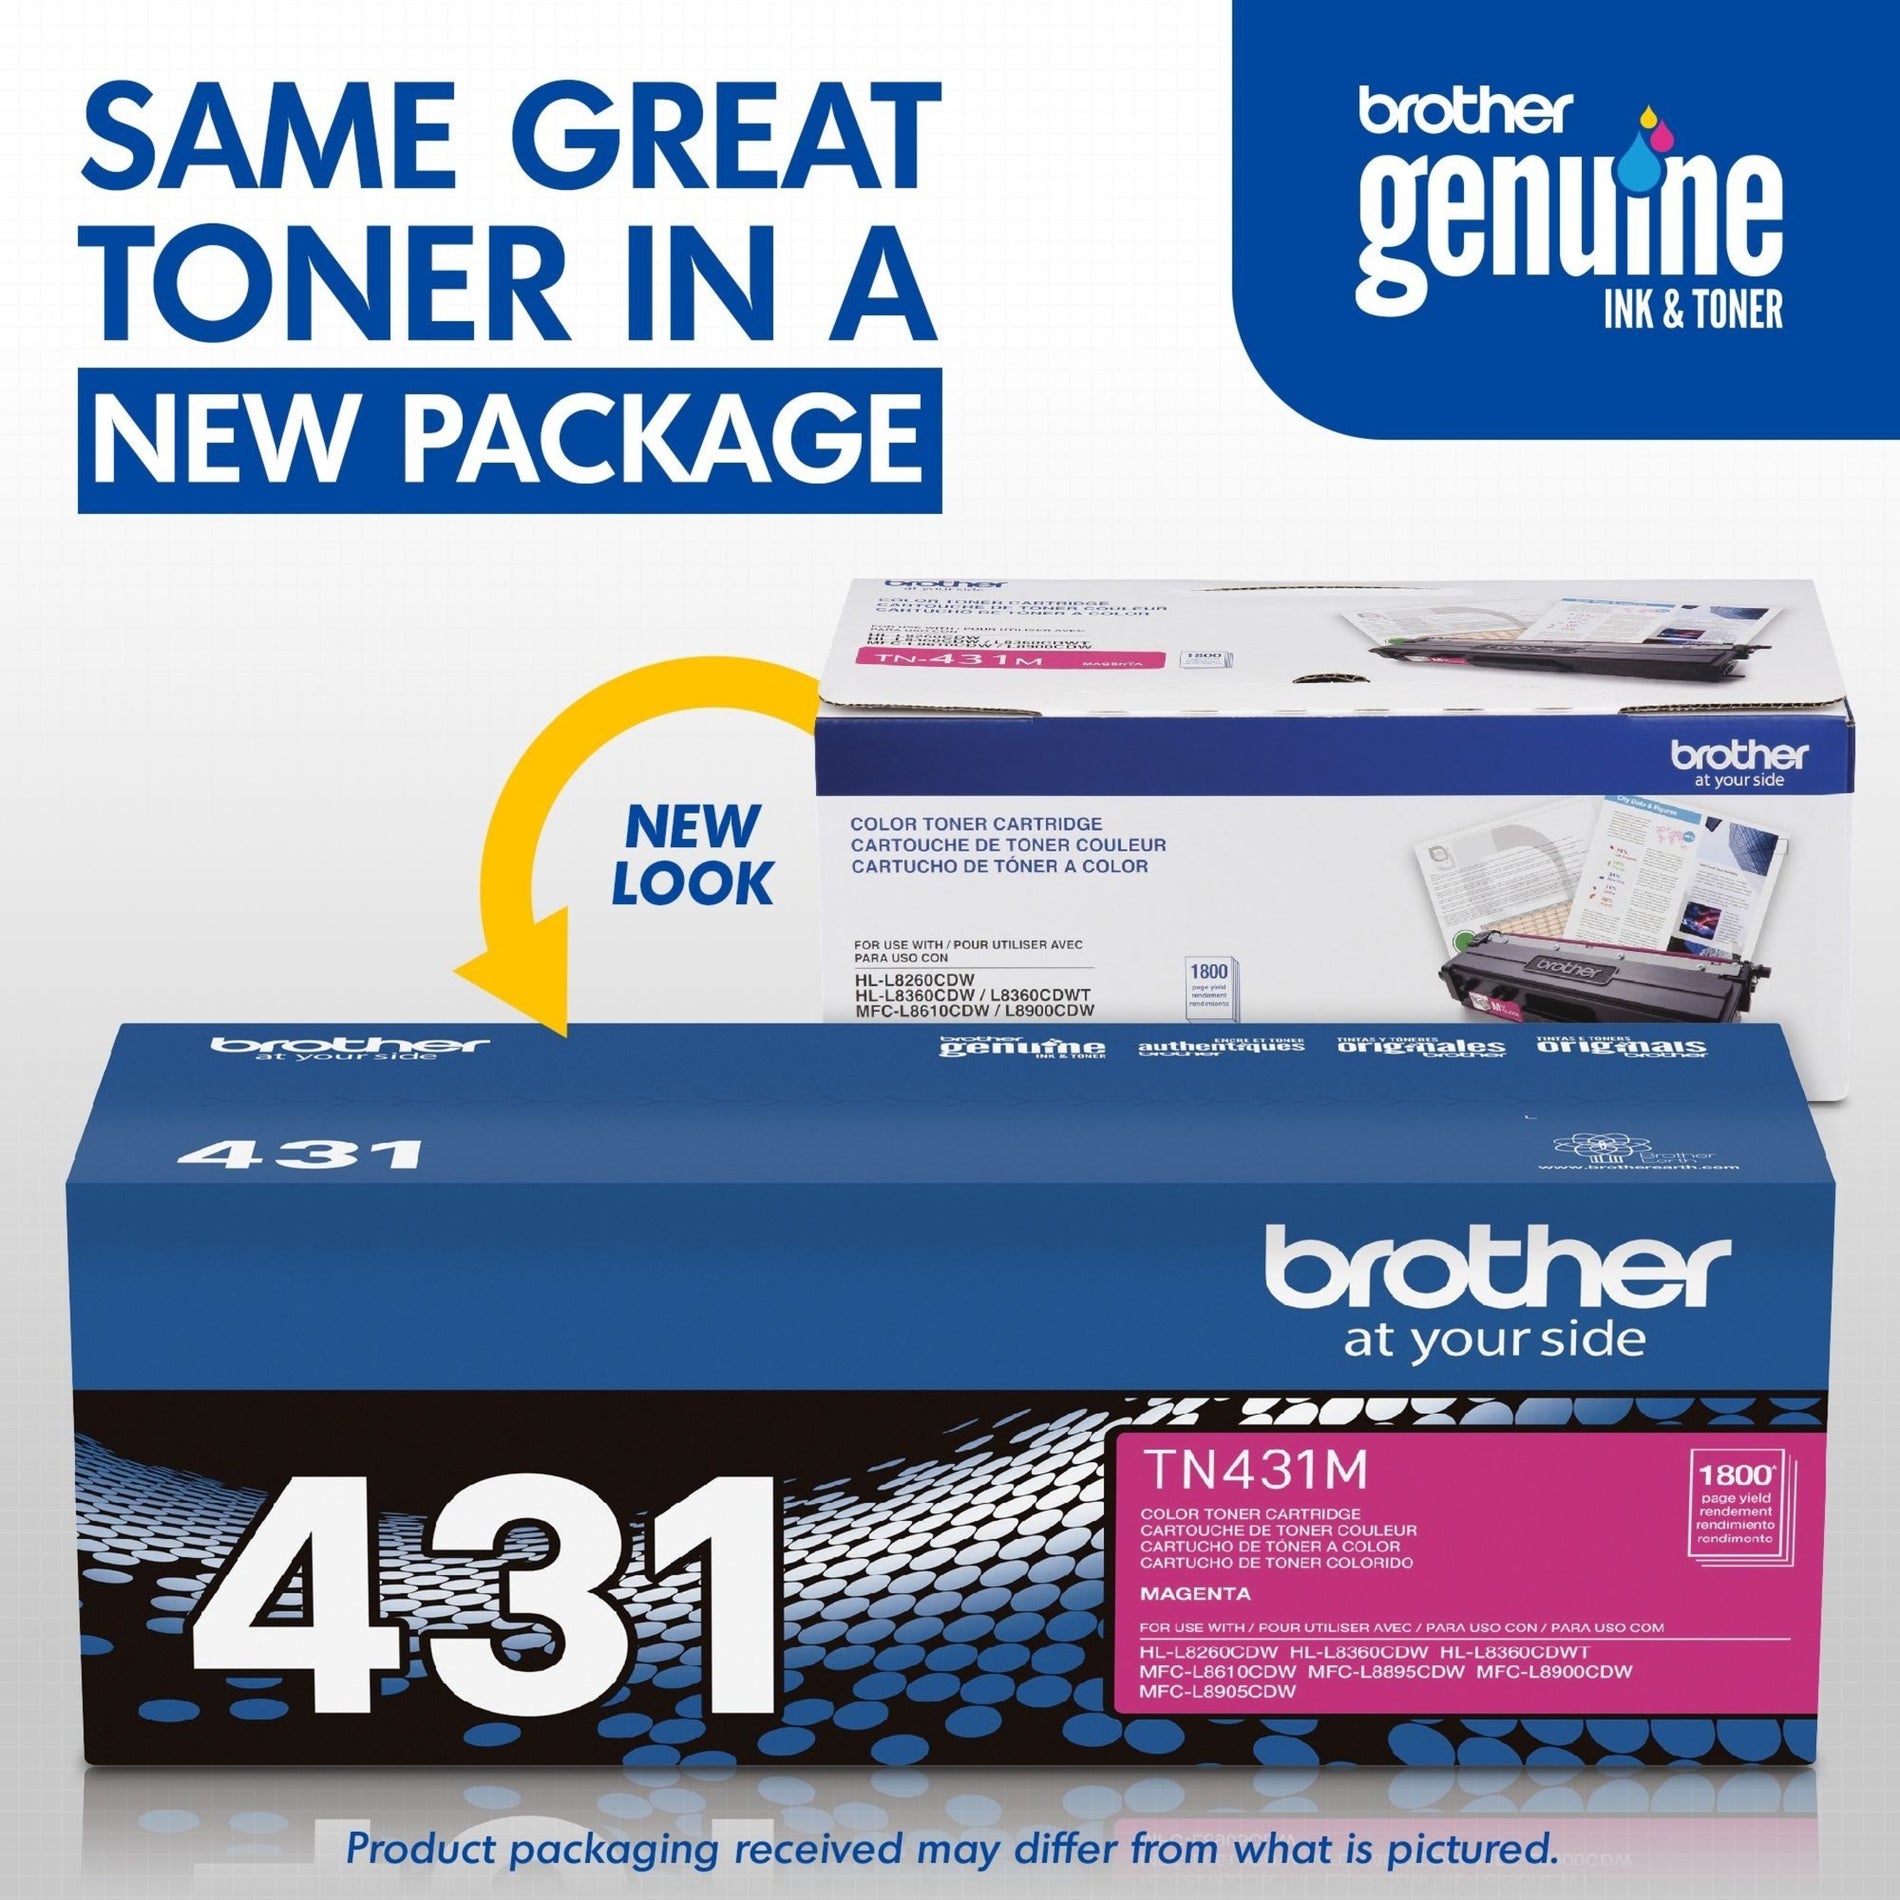 Brother TN431M Toner Cartridge Magenta 1800 Pages Standard Yield